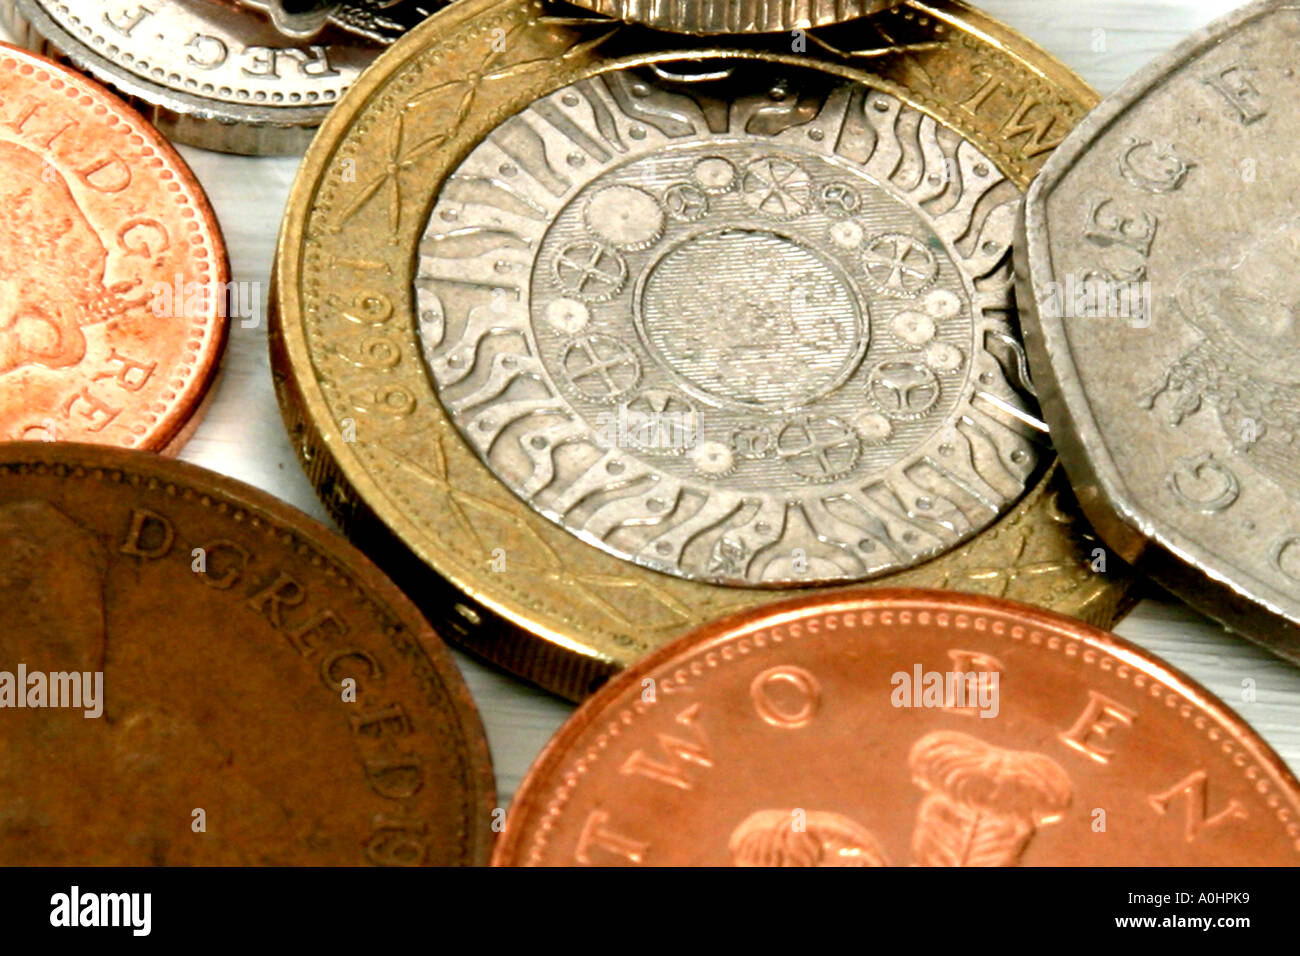 A pile of English coins Stock Photo